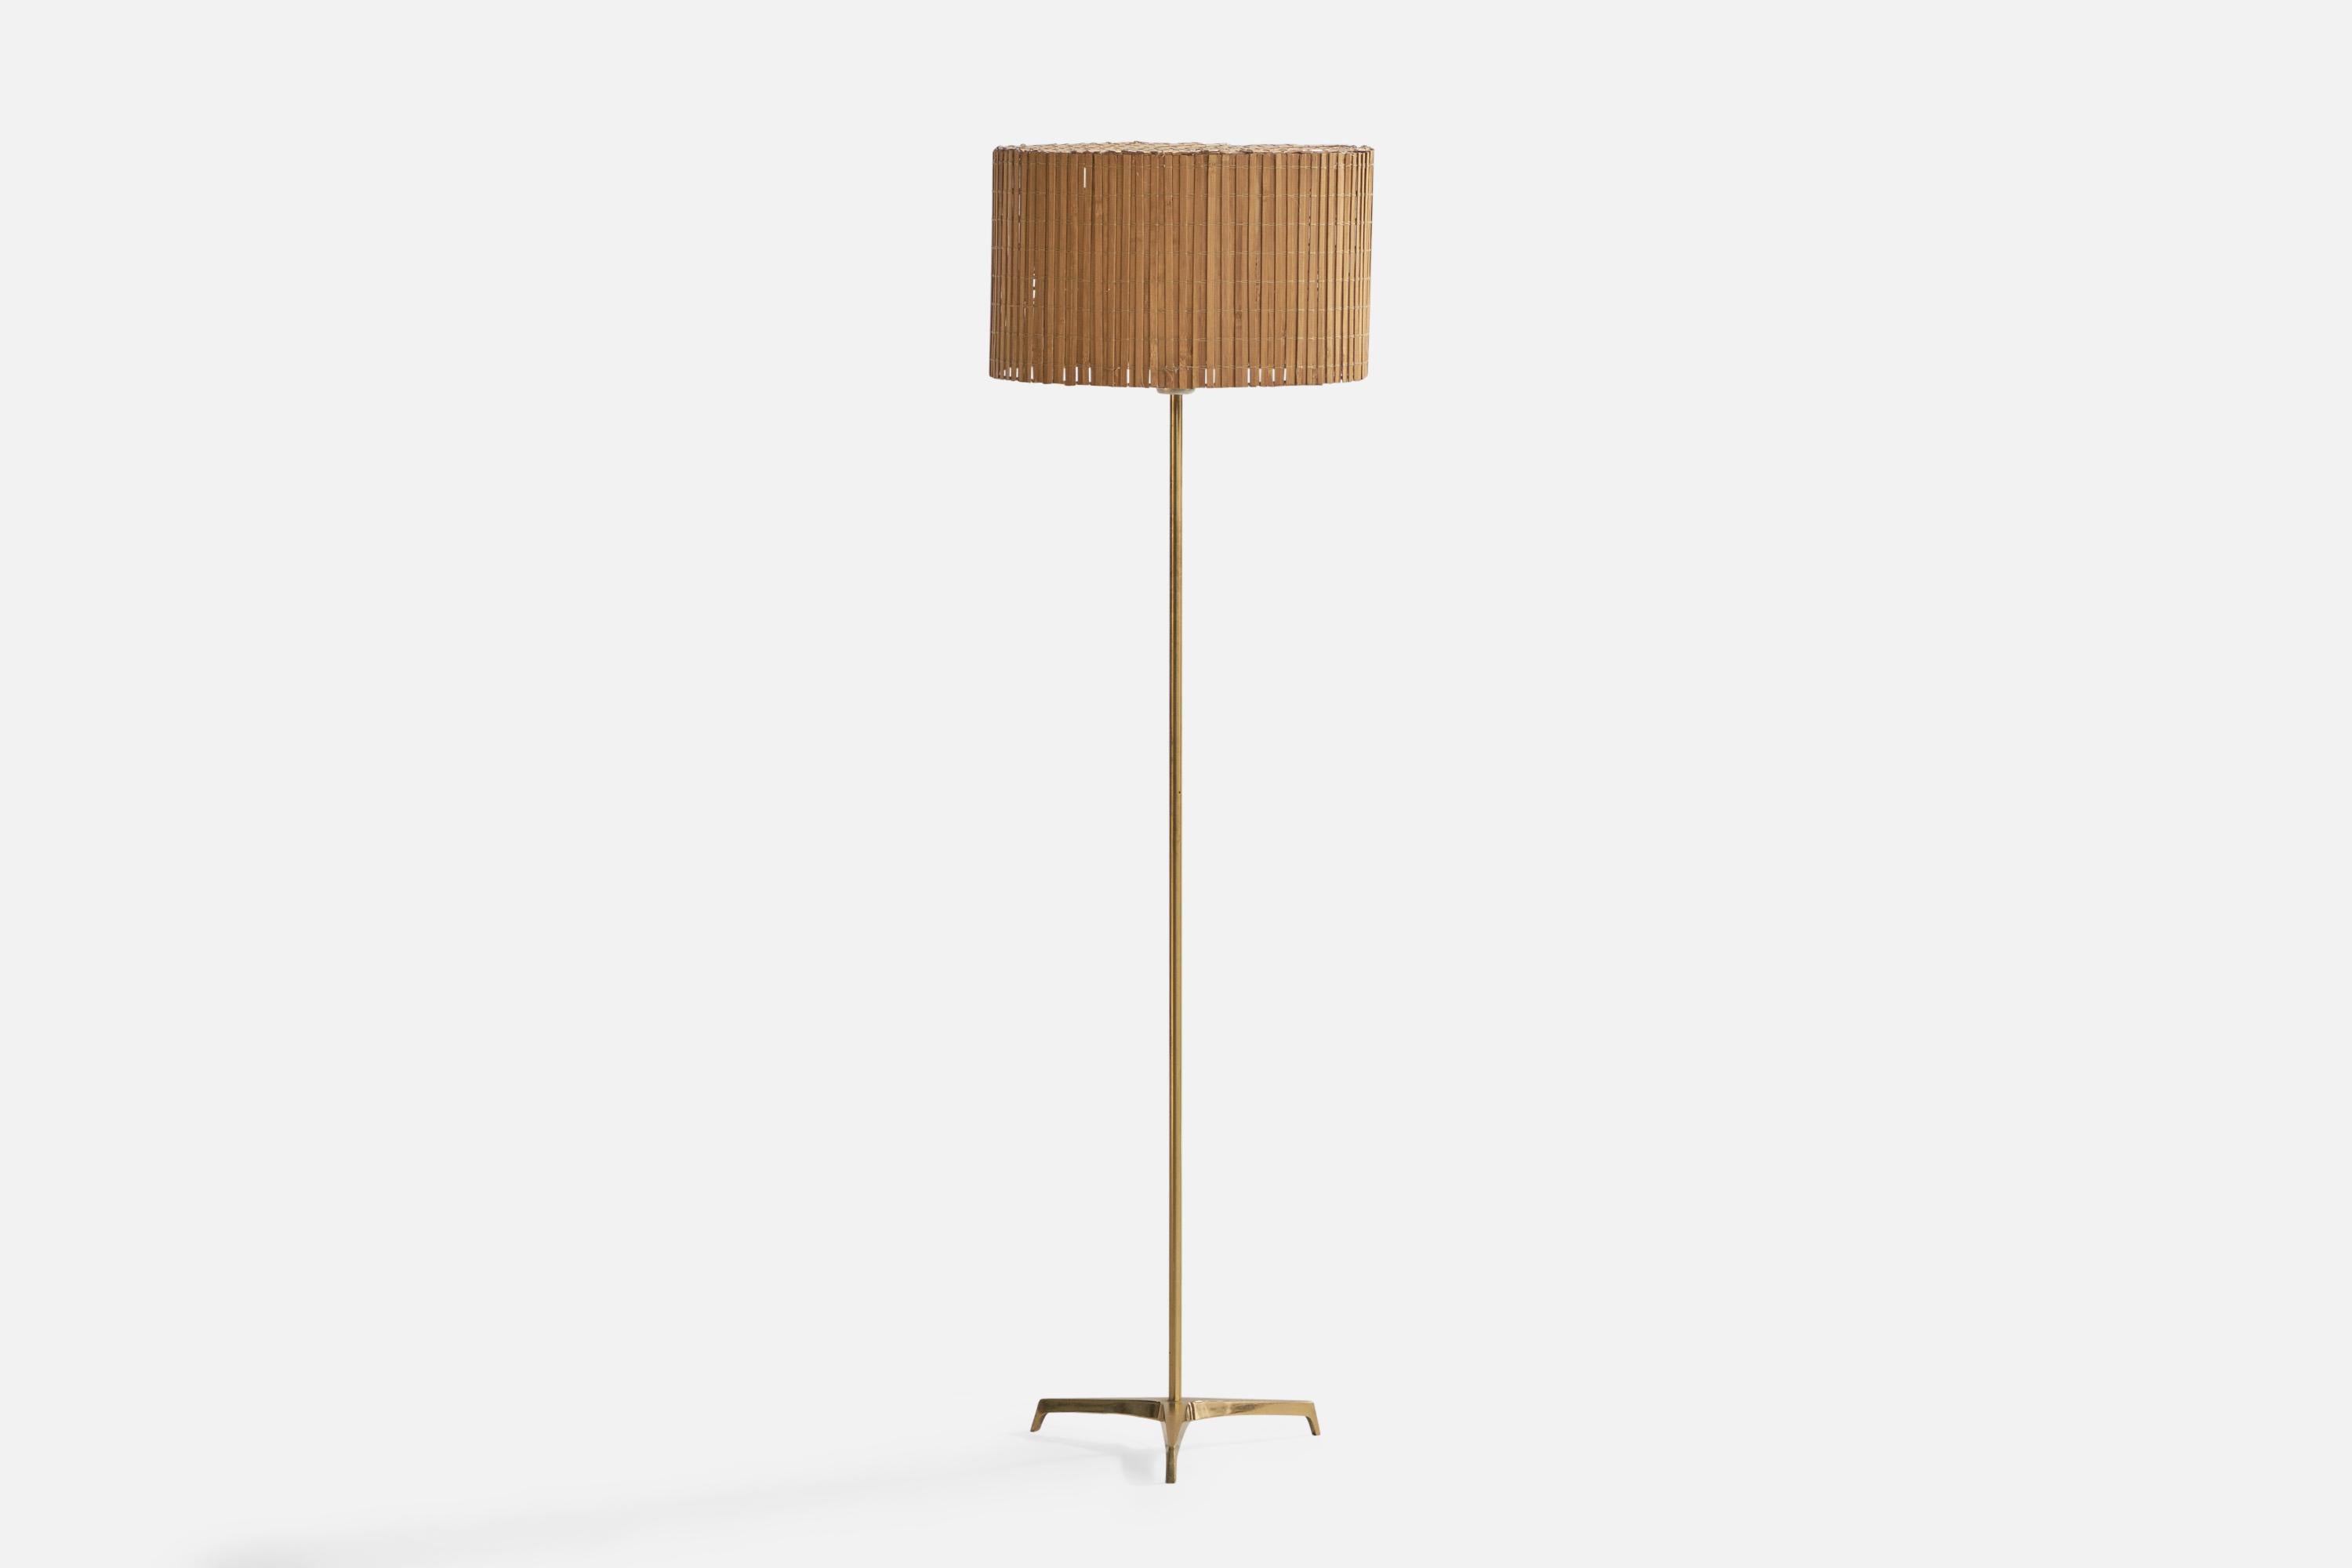 A brass and woven reed floor lamp designed and produced in Sweden, c. 1950s.

Overall Dimensions (inches): 56” H x 16.15” Diameter. Stated dimensions include shade. 
Bulb Specifications: E-26 Bulb
Number of Sockets: 1
All lighting will be converted